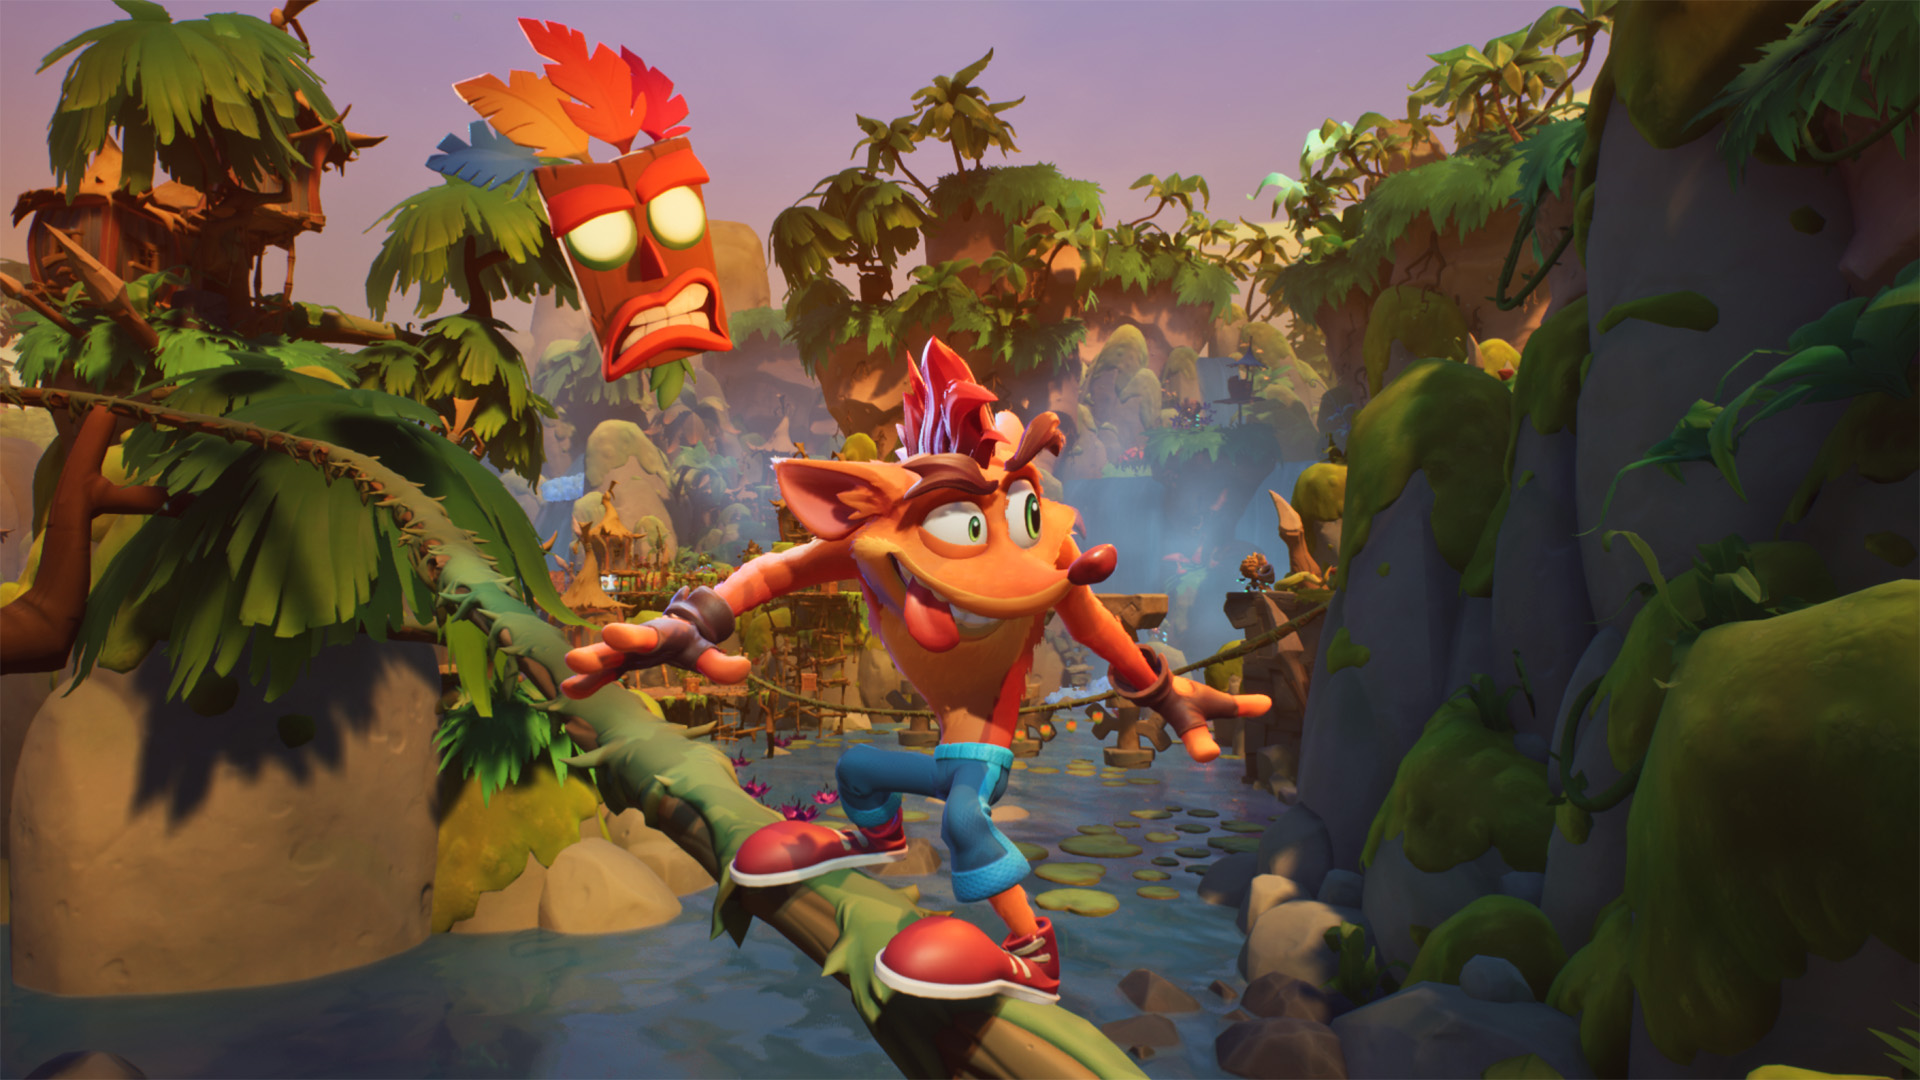 Multiplayer Crash Bandicoot game leaks, but not the one you’re thinking of